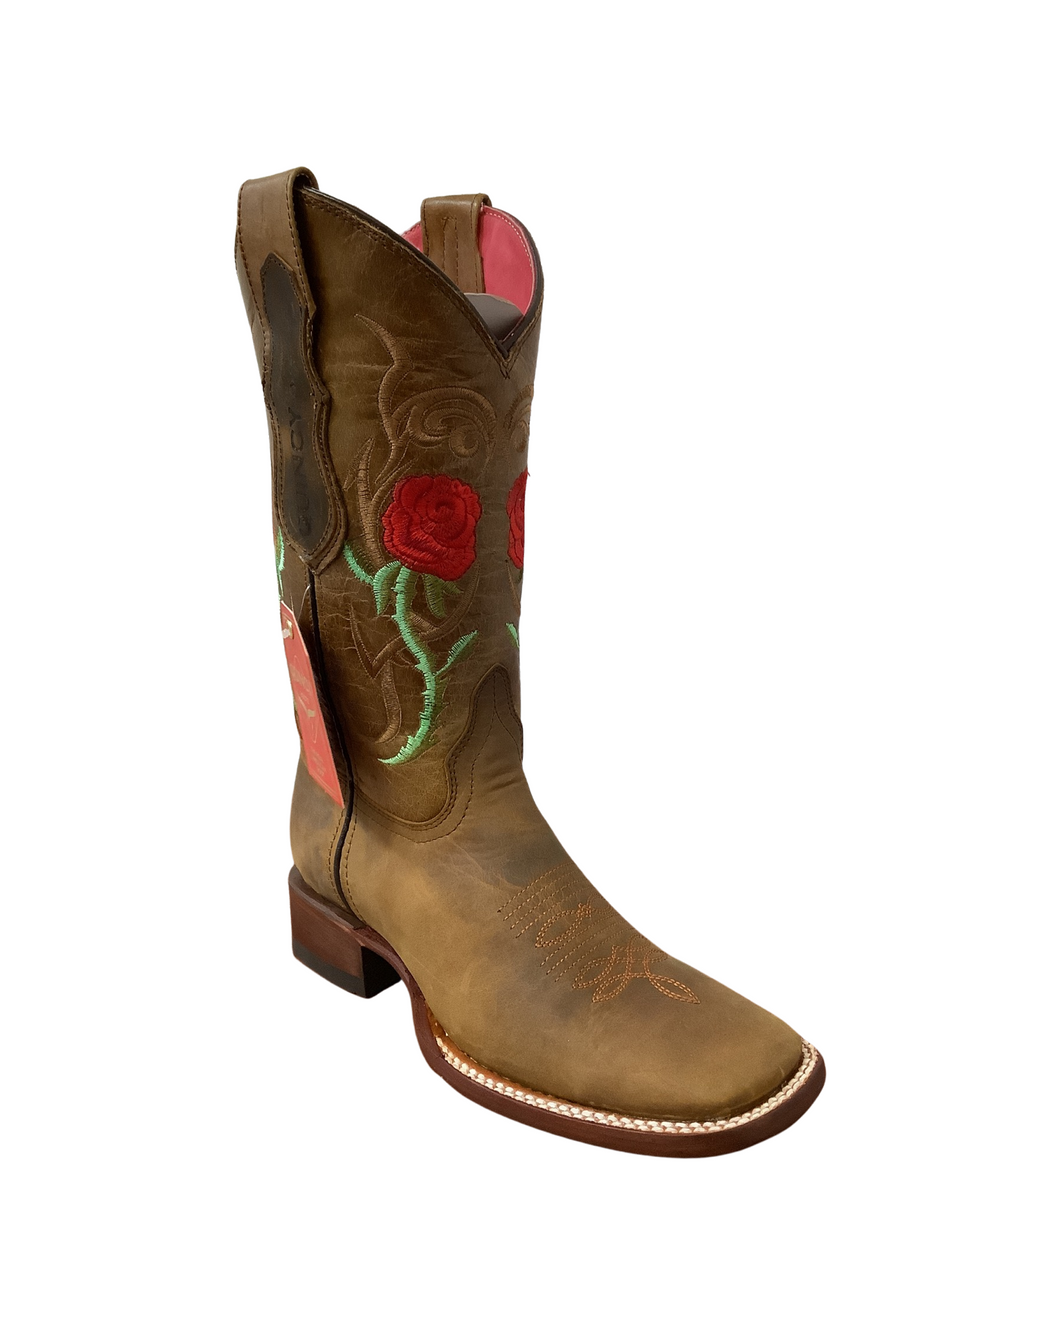 Quincy Boots Tan and Red Roses Wide Square Toe Boot